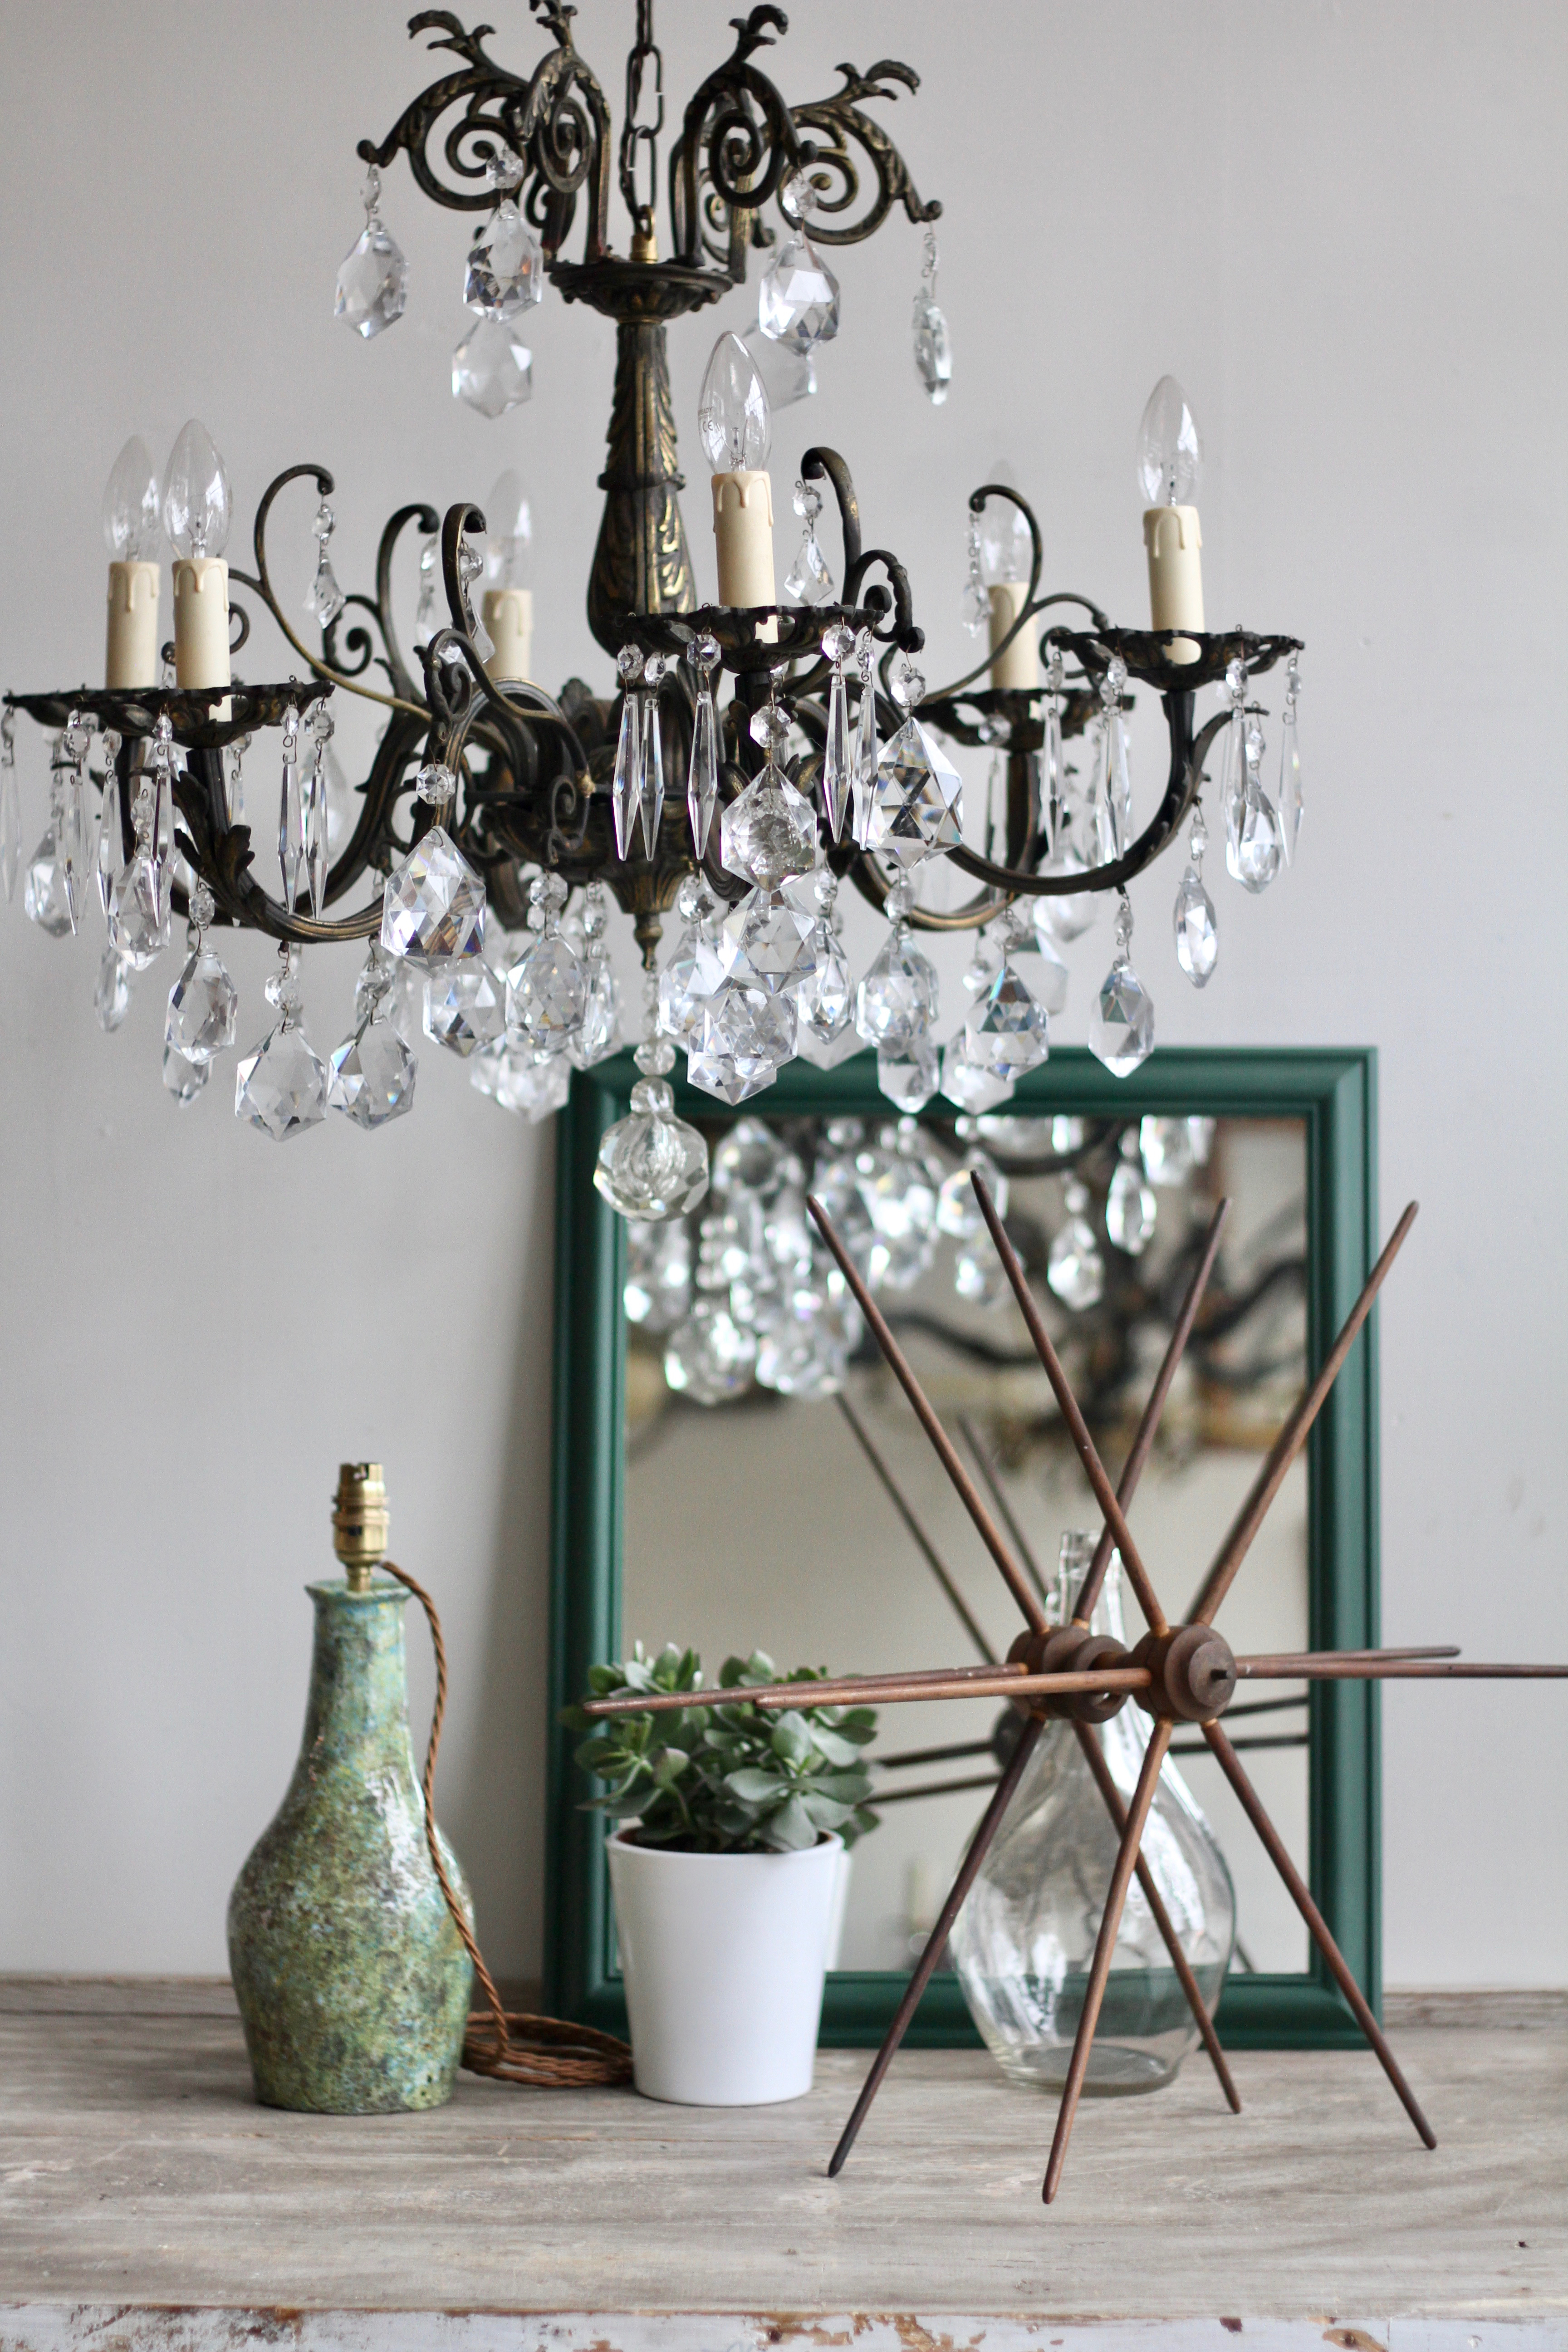 Shop Styling. Ornate Brass Chandelier with Annie Sloan painted Mirror, Textile Swift and Pottery Lamp.